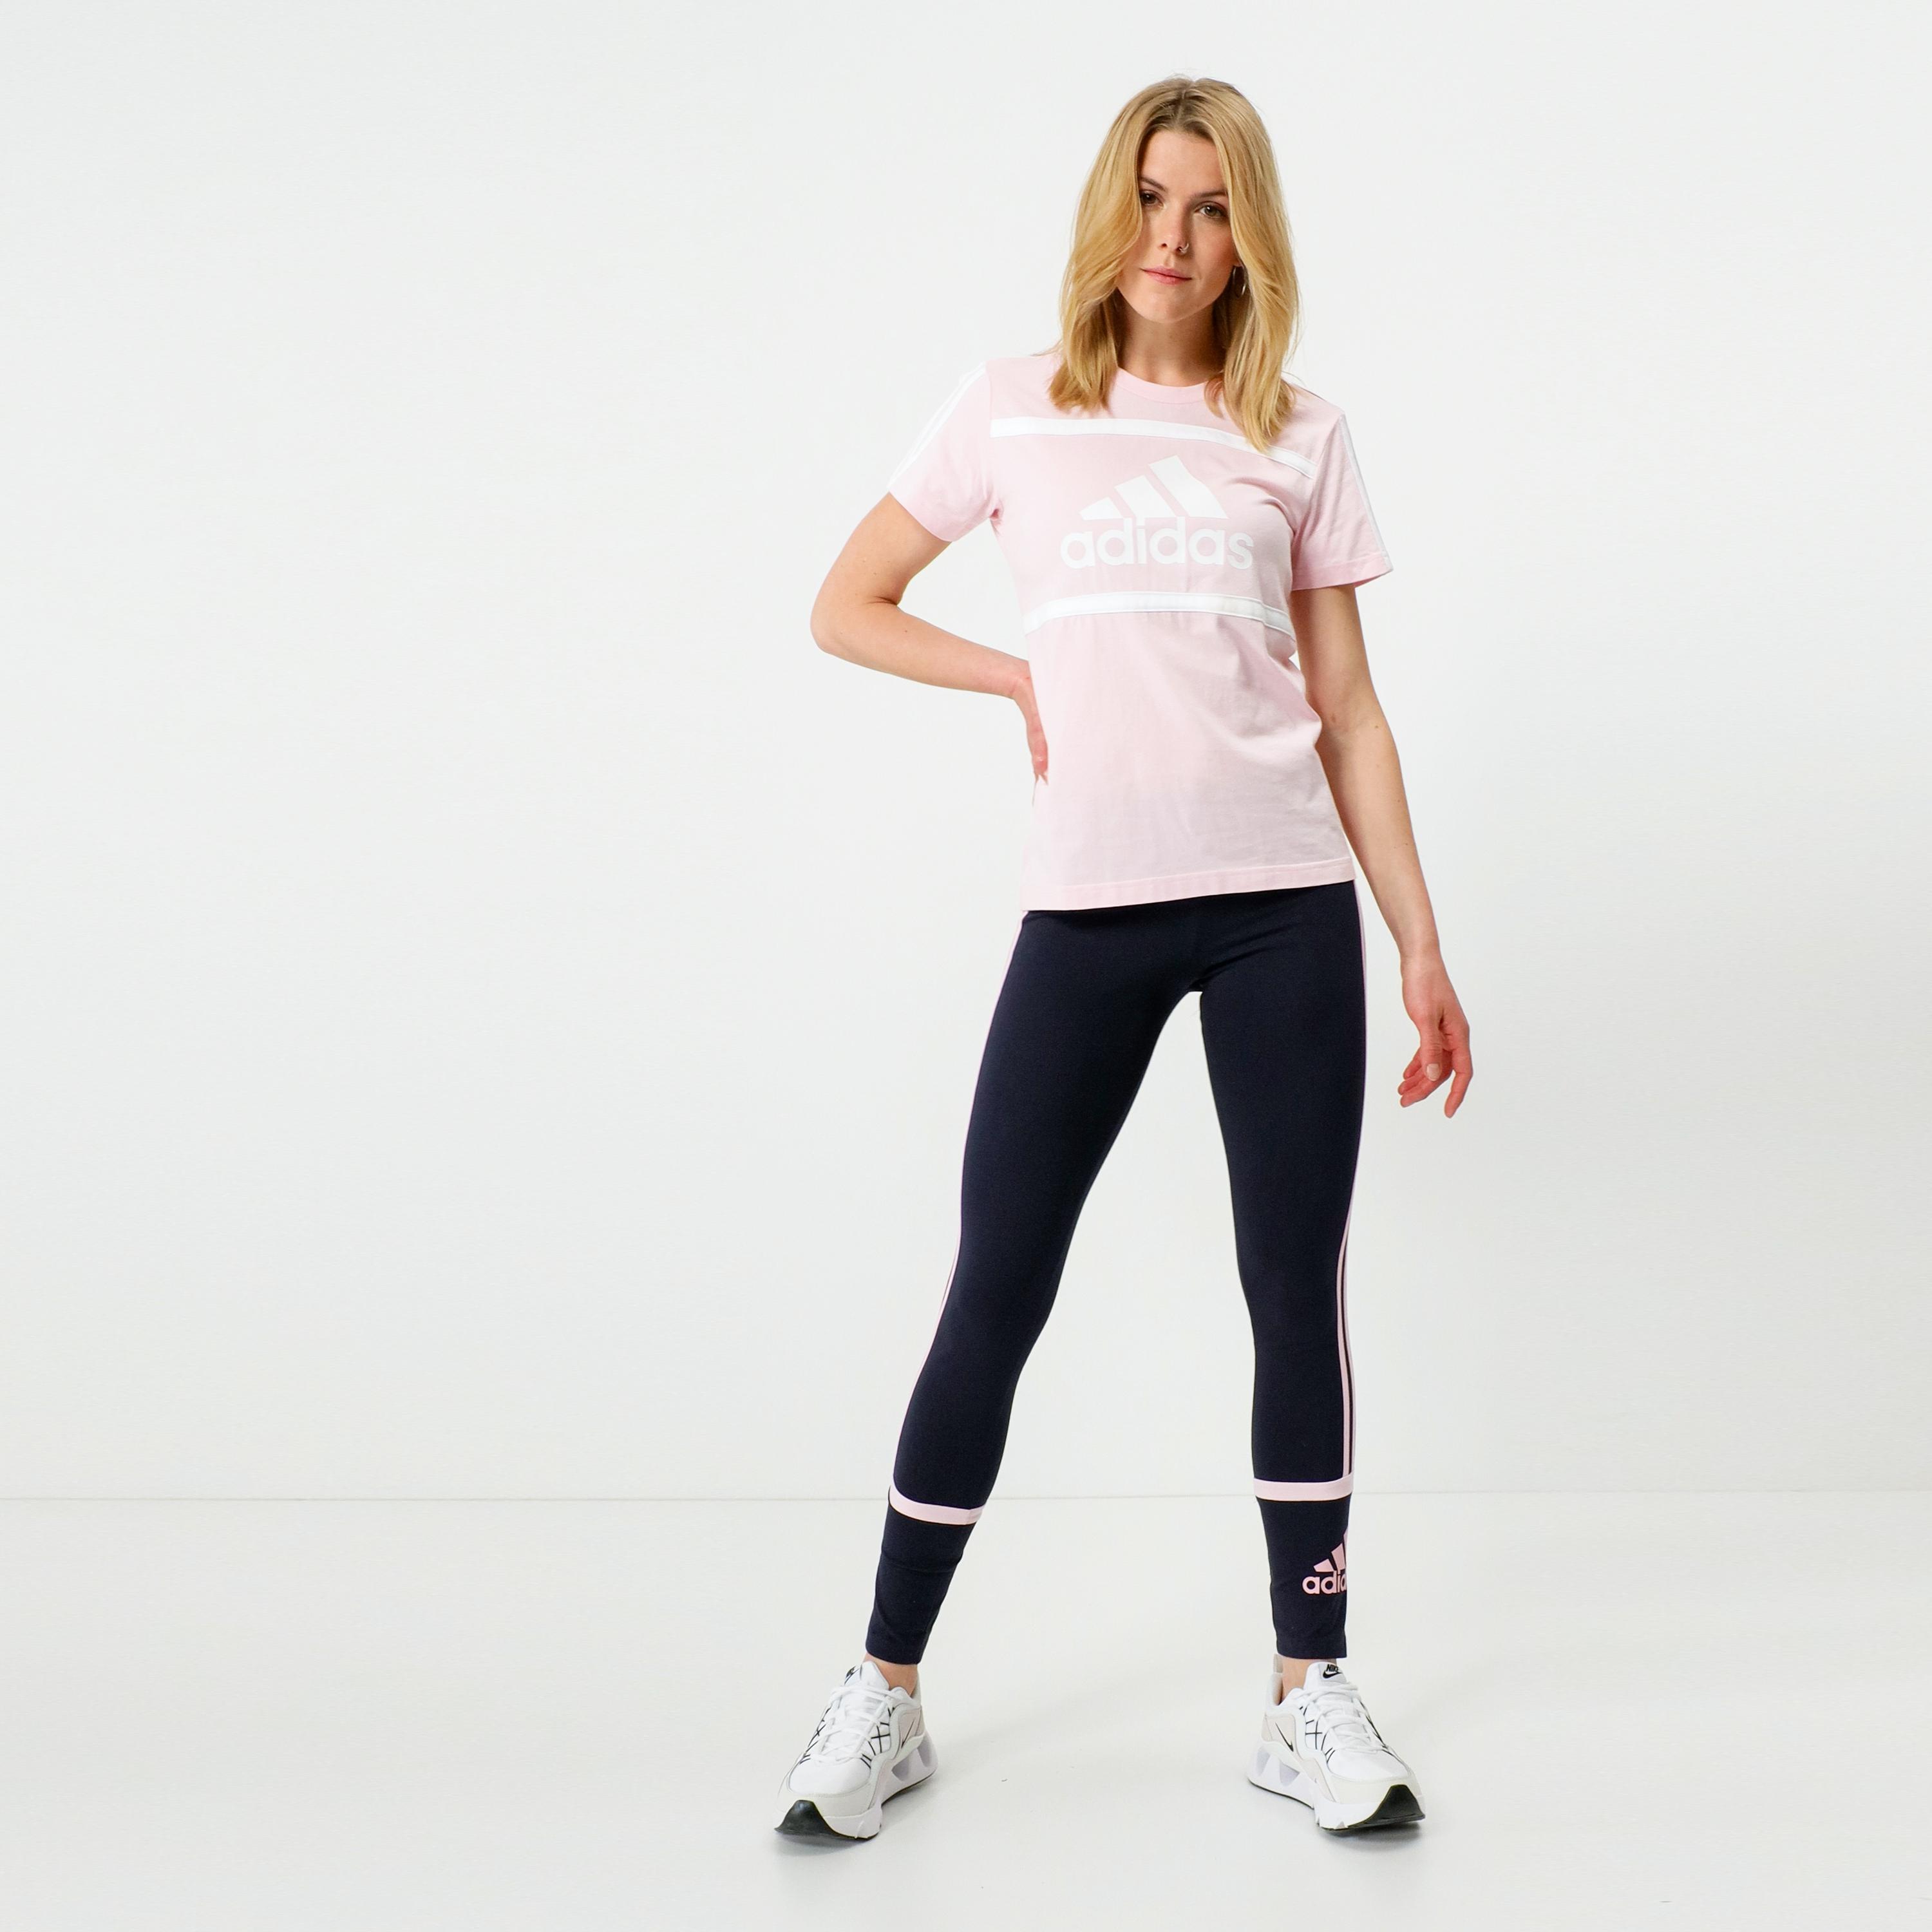 ADIDAS PERFORMANCE Funktionsshirt in Rosa 